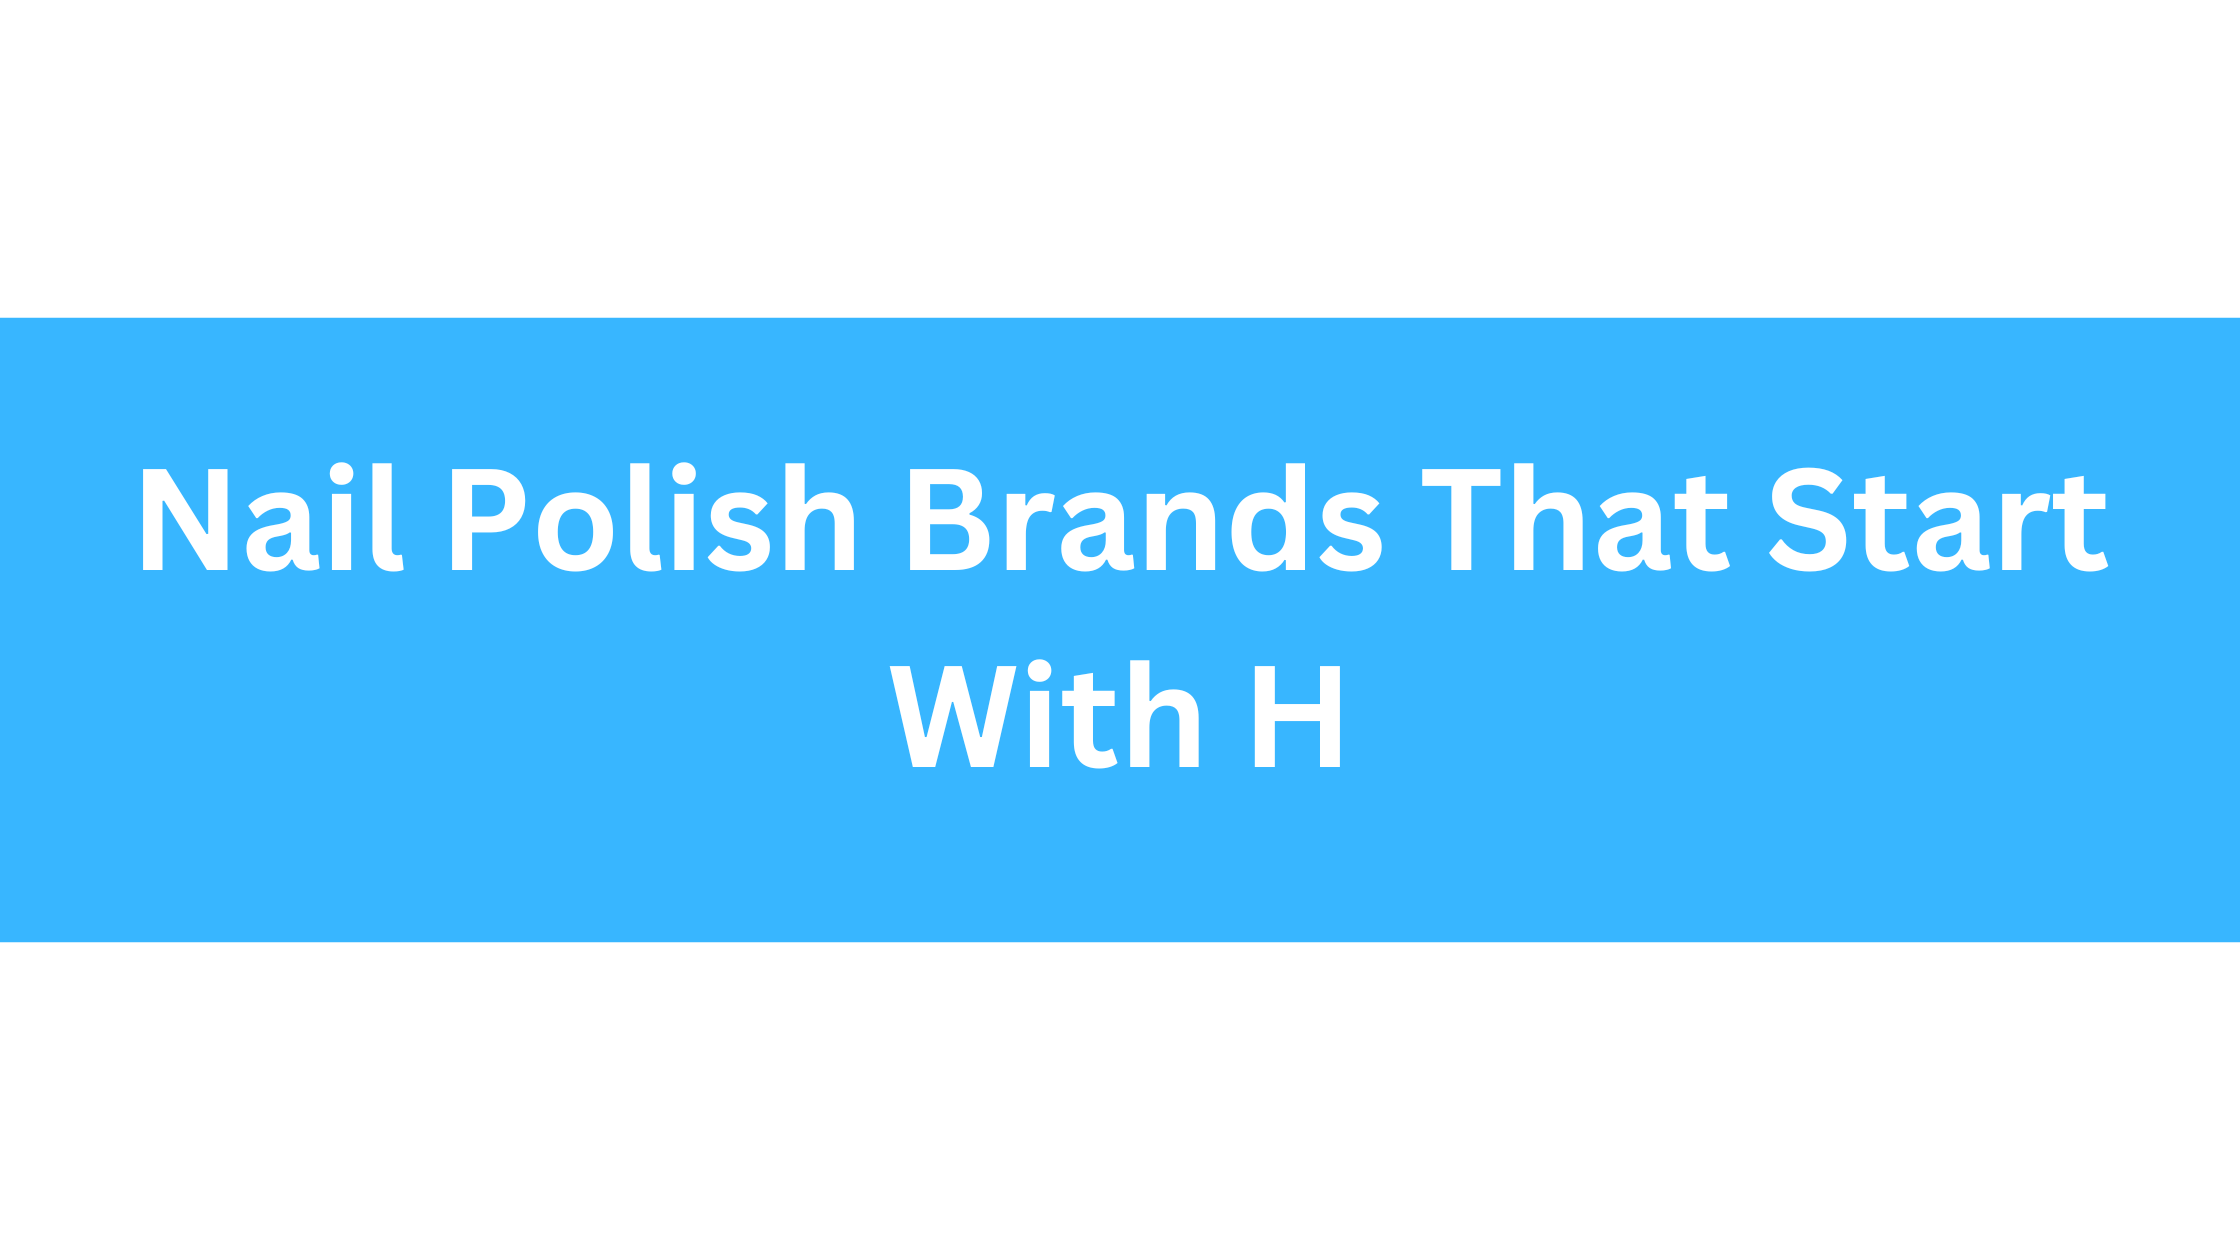 Nail Polish Brands That Start With H